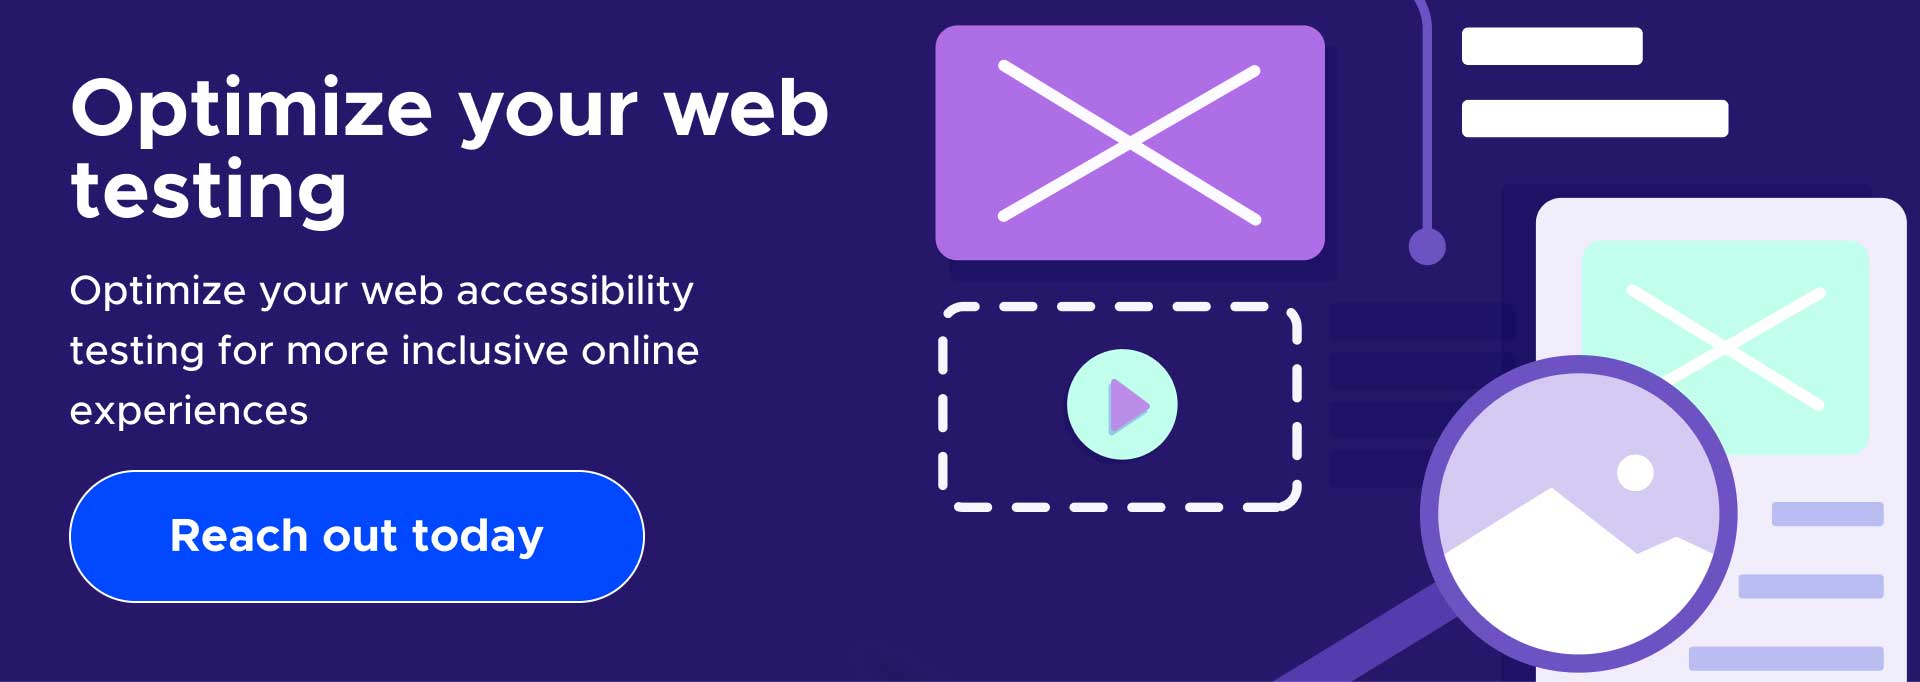 Optimize your web accessibility testing for more inclusive online experiences